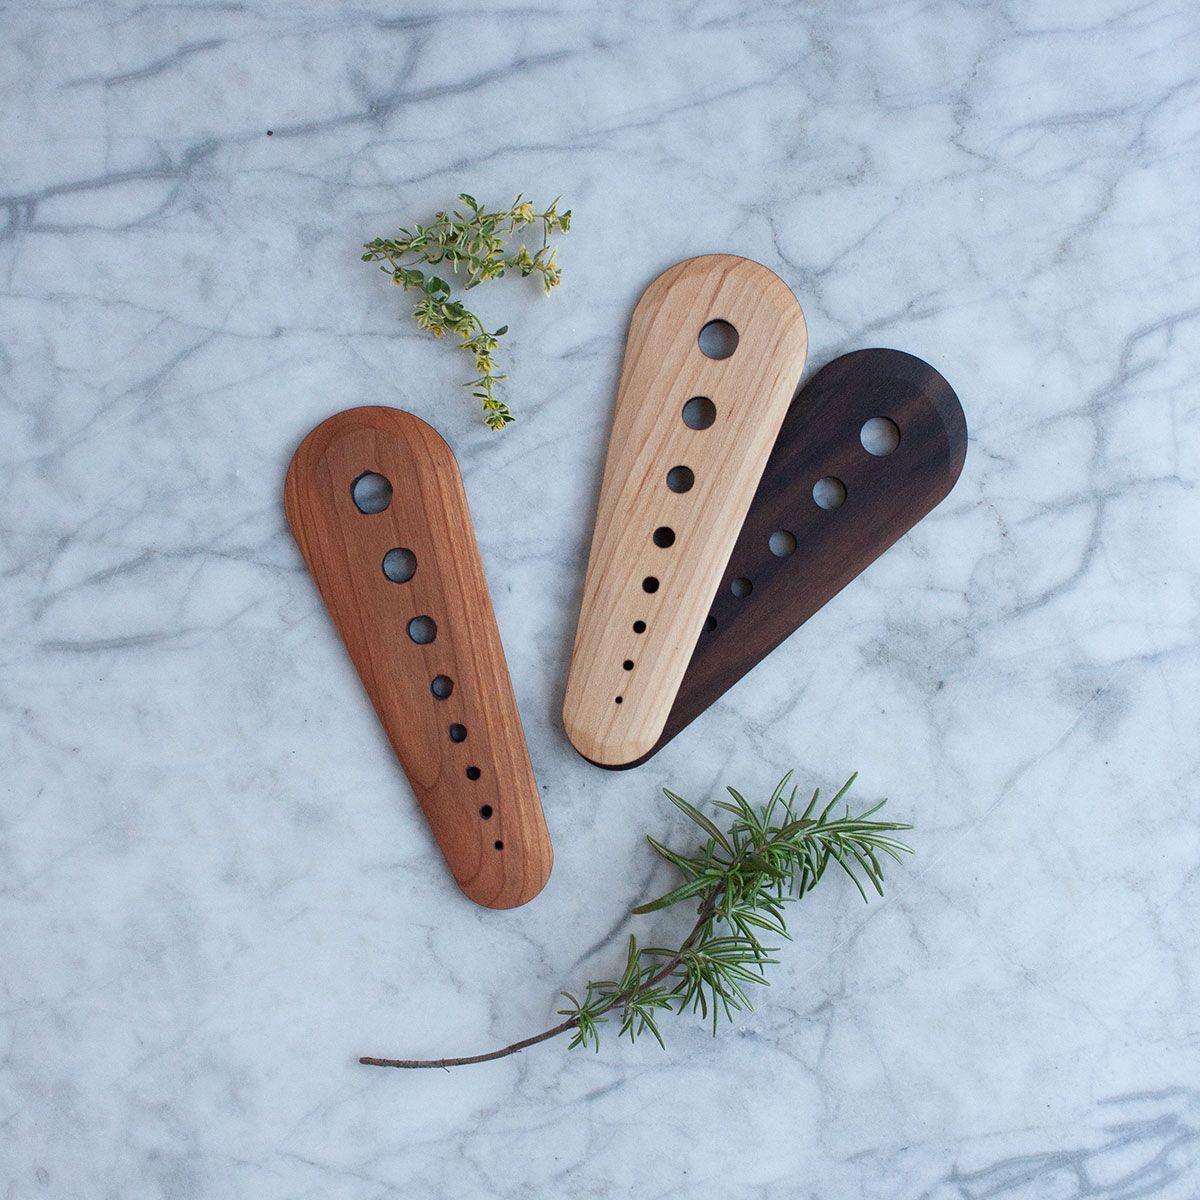 Three herb strippers, oblong solid wood pieces with 8 holes in gradually increasing circumference, in the available wood types: cherry, maple, and walnut rest on a marble slab with fresh herbs framing them.